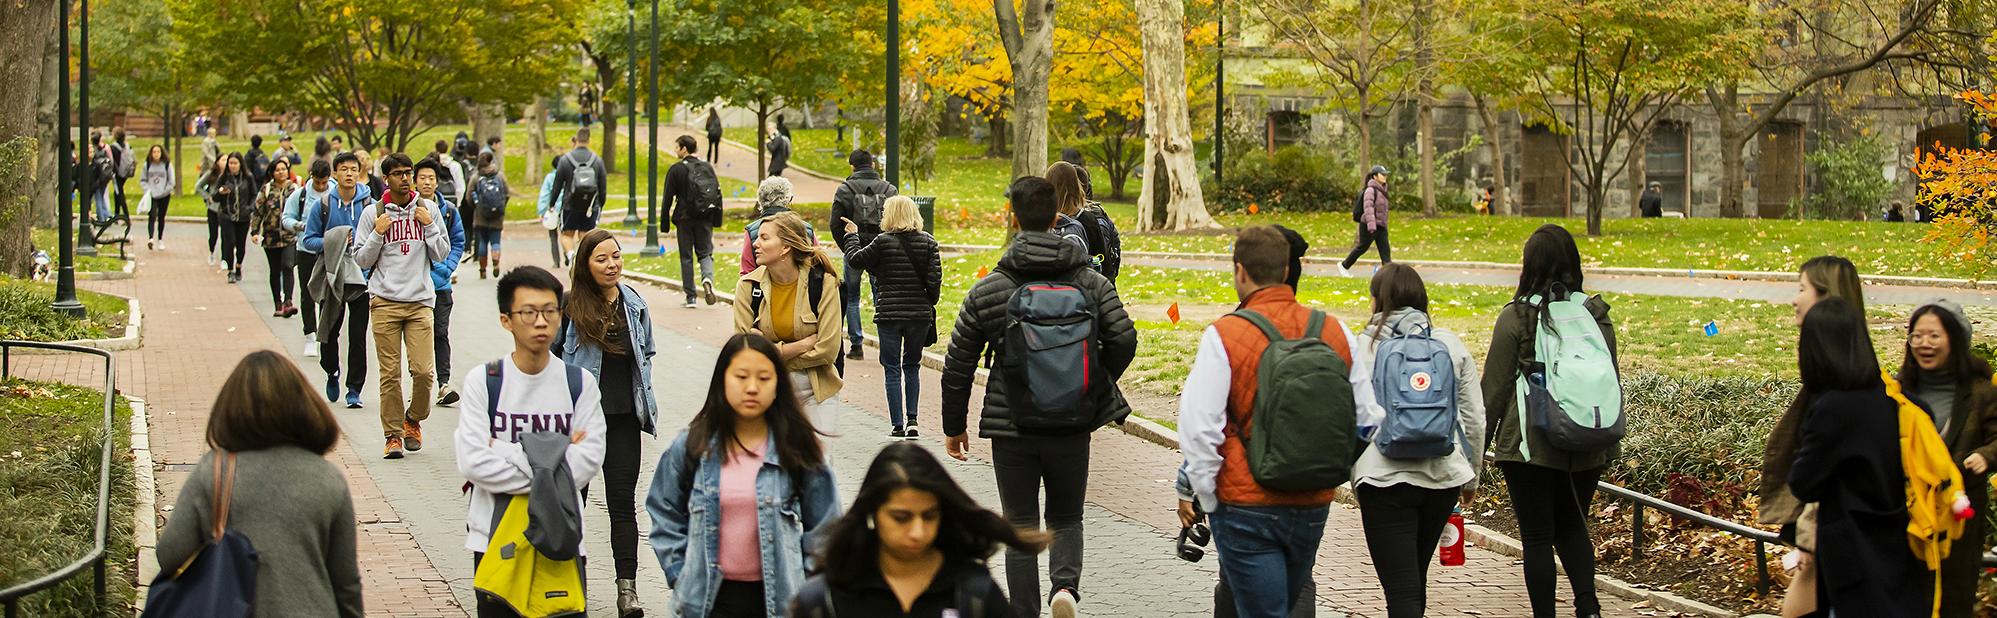 Students walking outdoors with trees with autumn colors